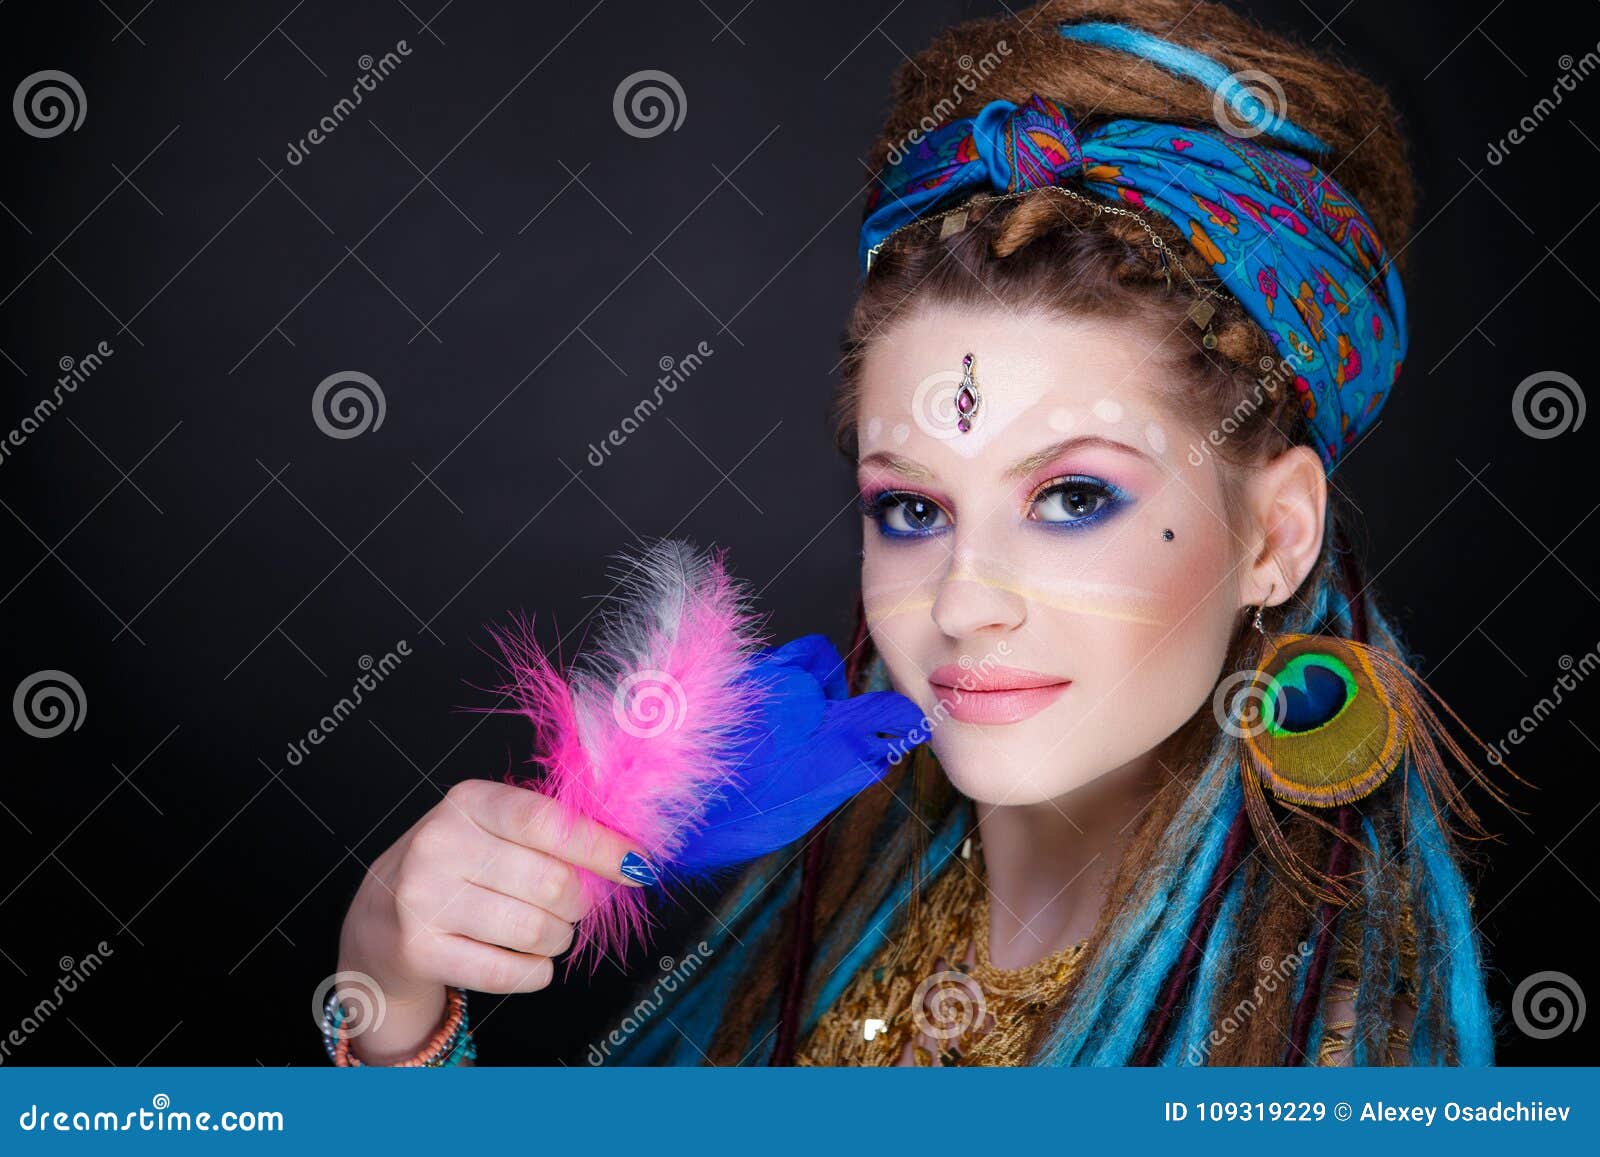 Woman Tribal Style Stock Image Image Of Horoscope Fortune